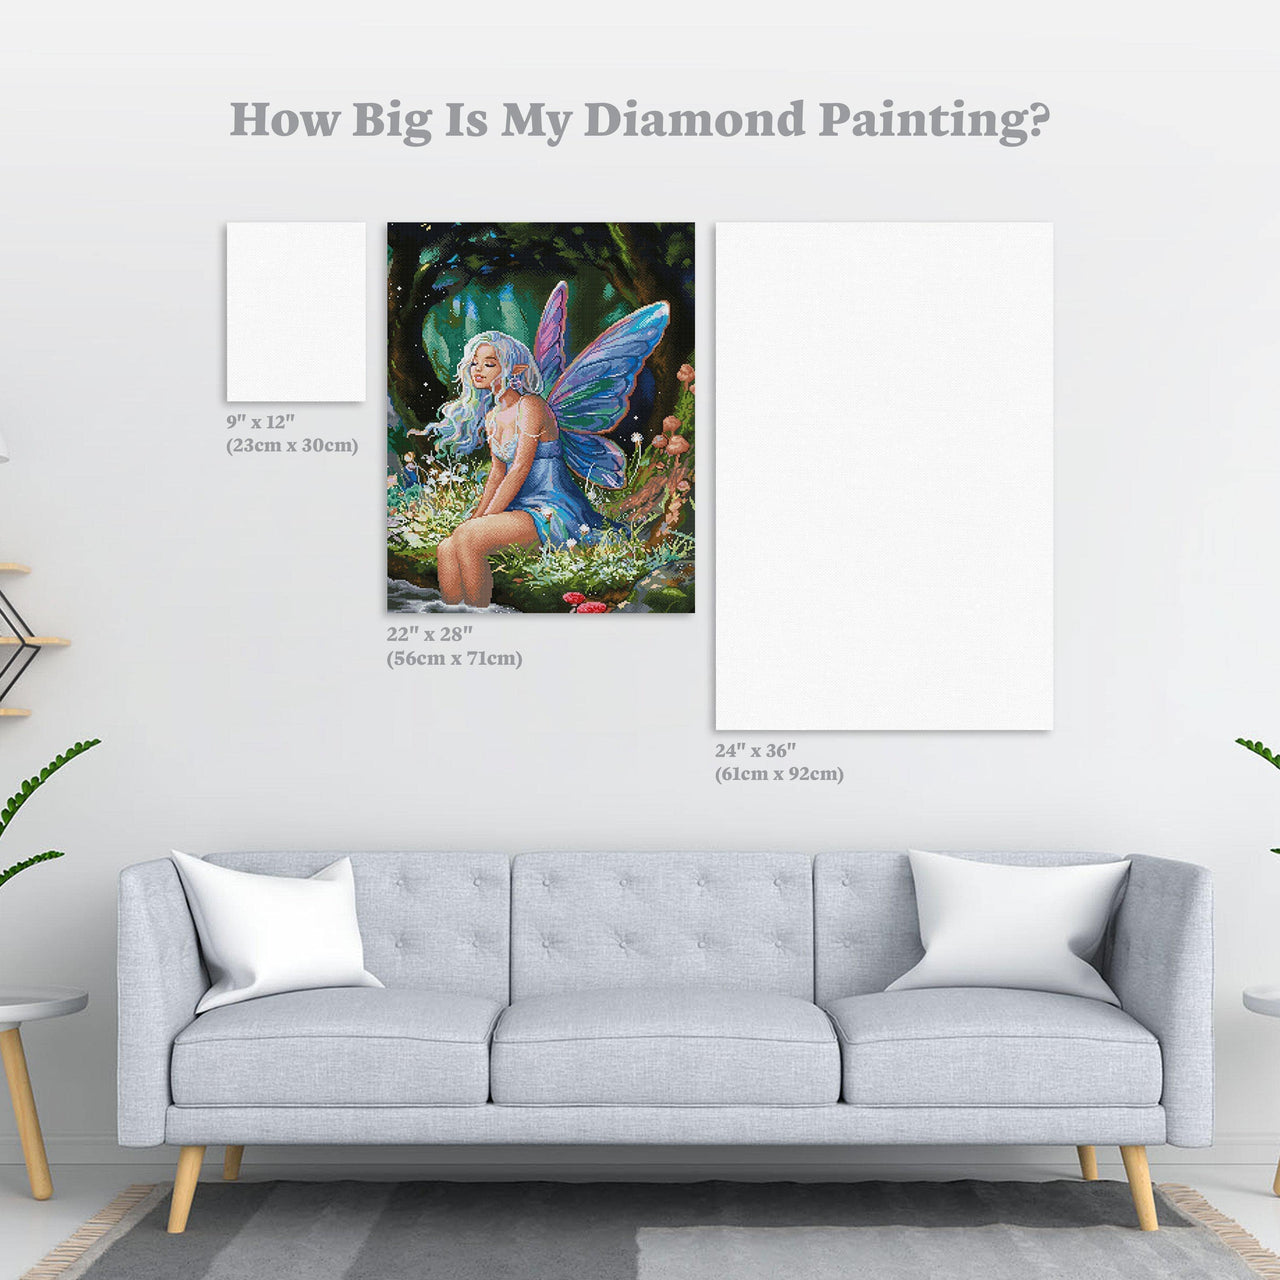 Diamond Painting Fairy Lights 22" x 28″ (56cm x 71cm) / Square With 60 Colors Including 4 ABs / 62,101